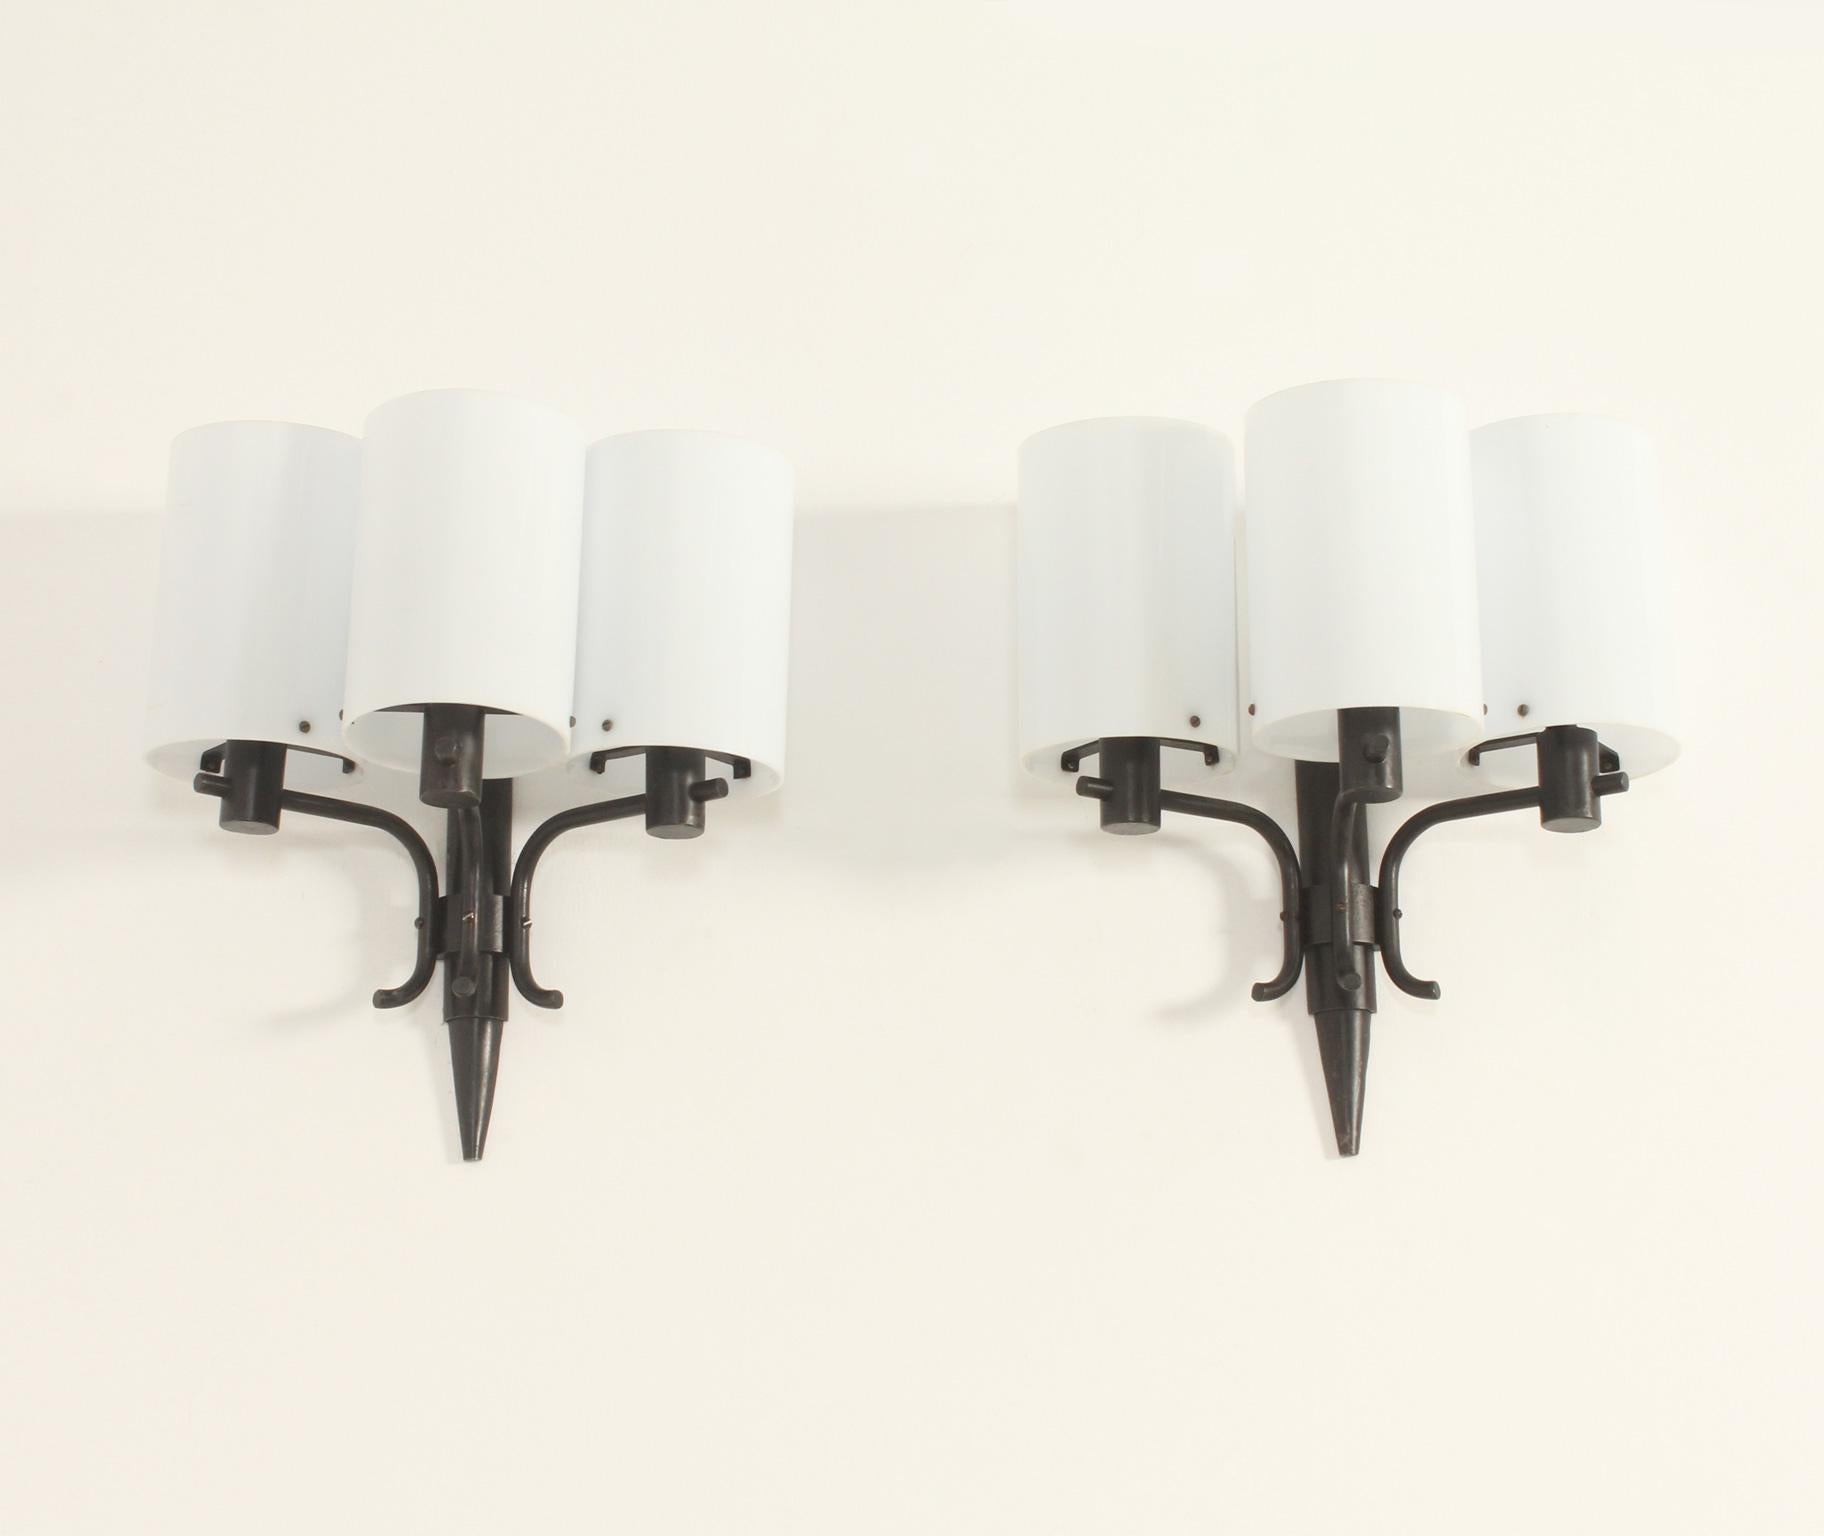 Pair of sconces designed in 1960's by Jordi Vilanova, Spain. Hand wrought iron patinated in black and three white methacrylate shades.